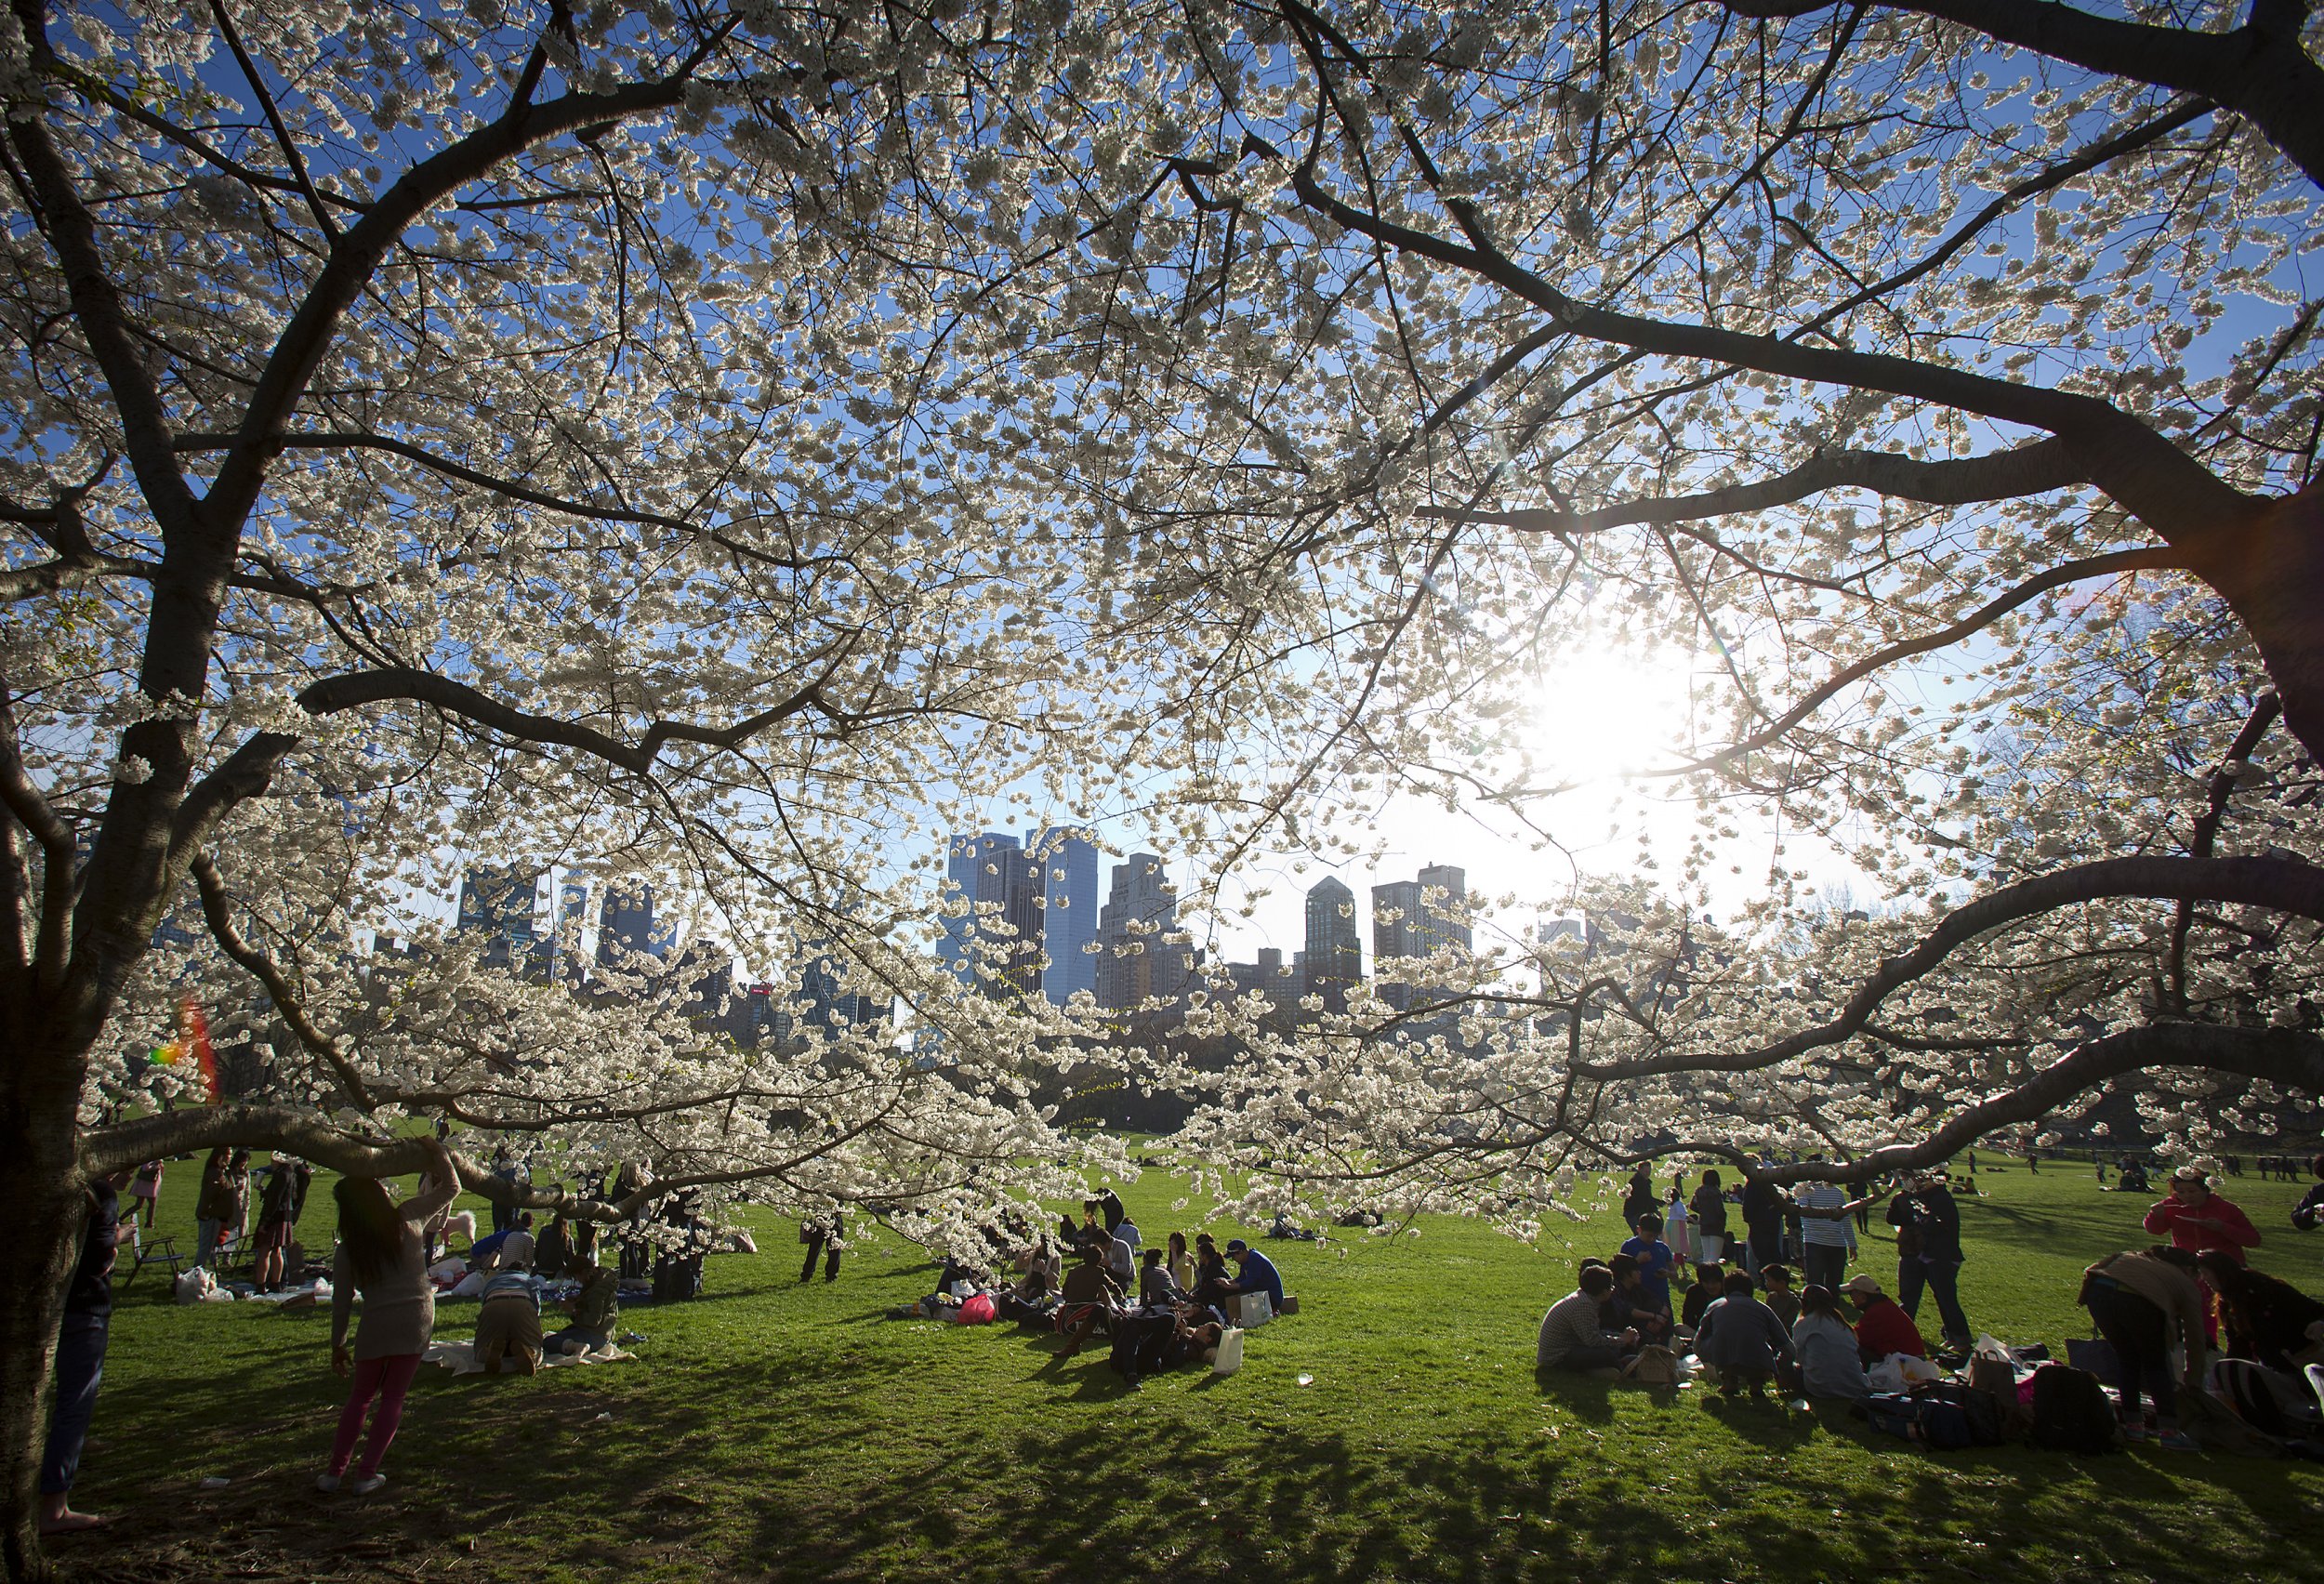 Spring Will Come Three Weeks Early in U.S. Thanks to Climate Change